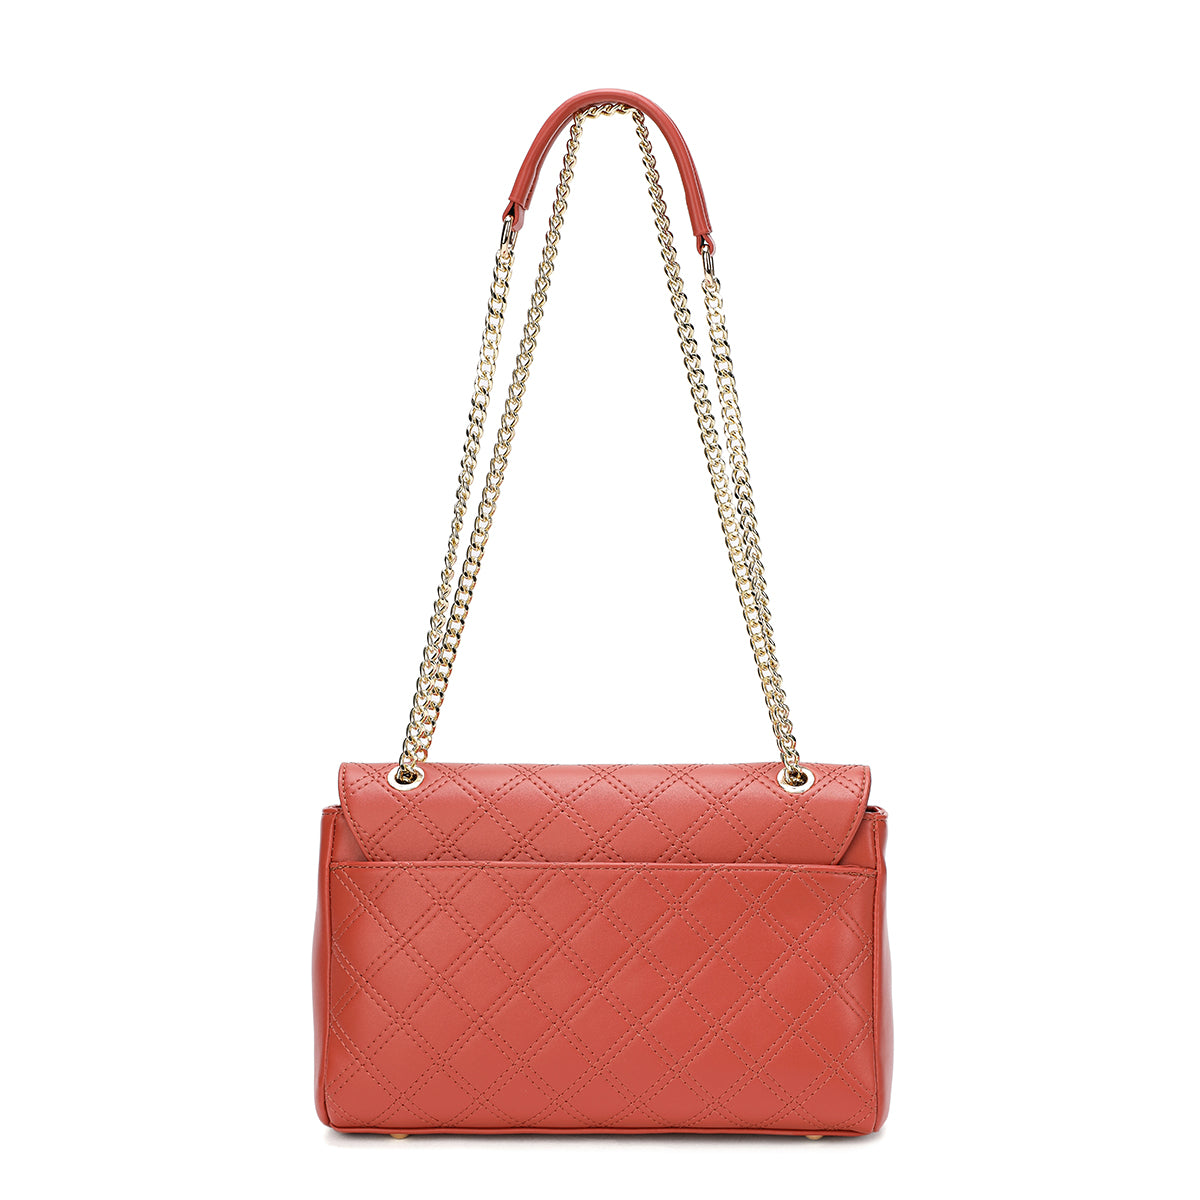 Handbag with an elegant golden chain shoulder strap, available in three elegant colors